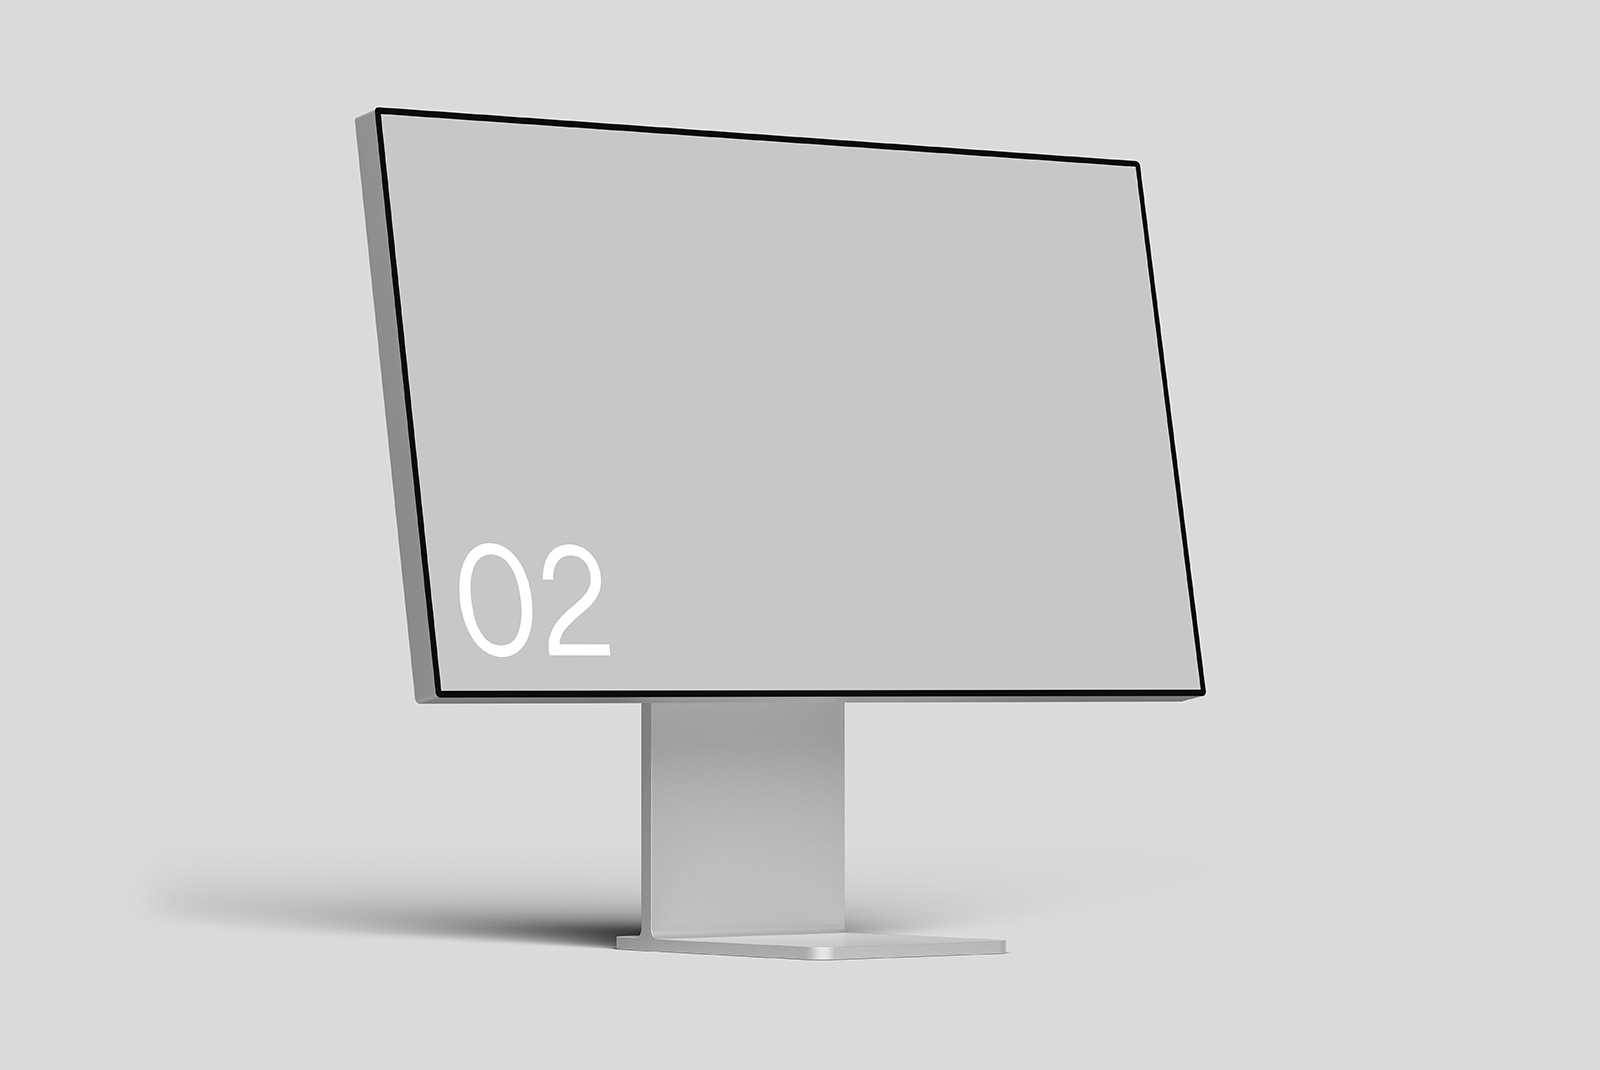 Minimalistic computer monitor mockup in a grayscale setting, perfect for presenting digital designs and user interfaces.